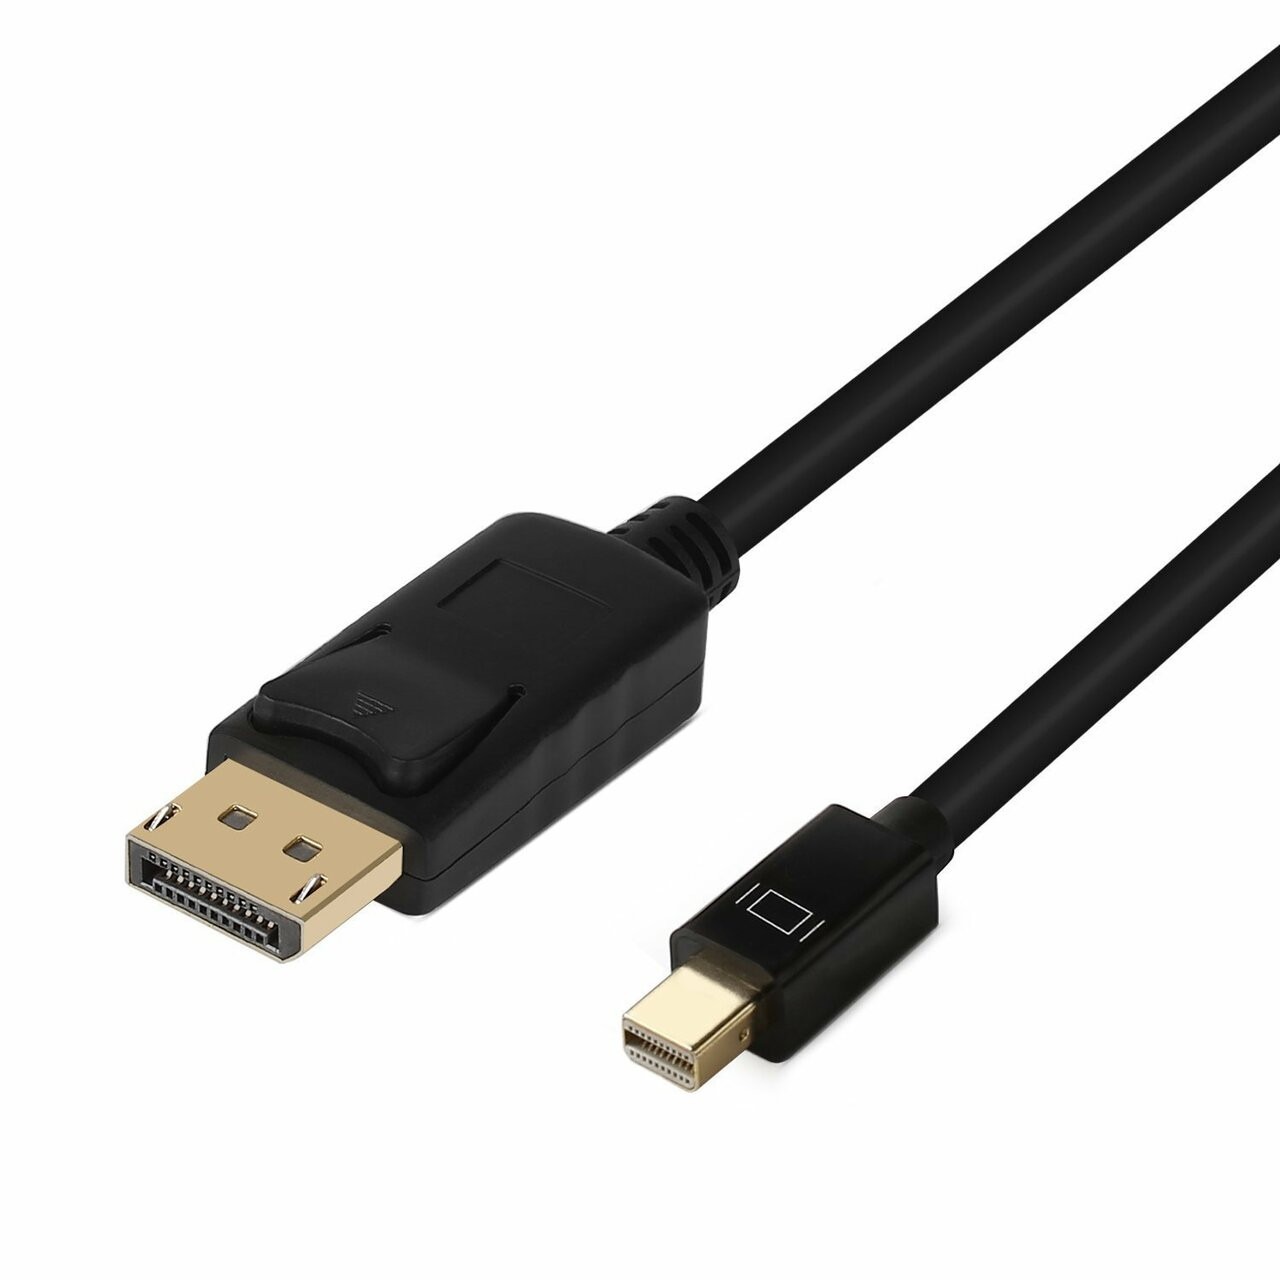 Cable Video Display Port to Mini Display Port 6' - DISCOUNT